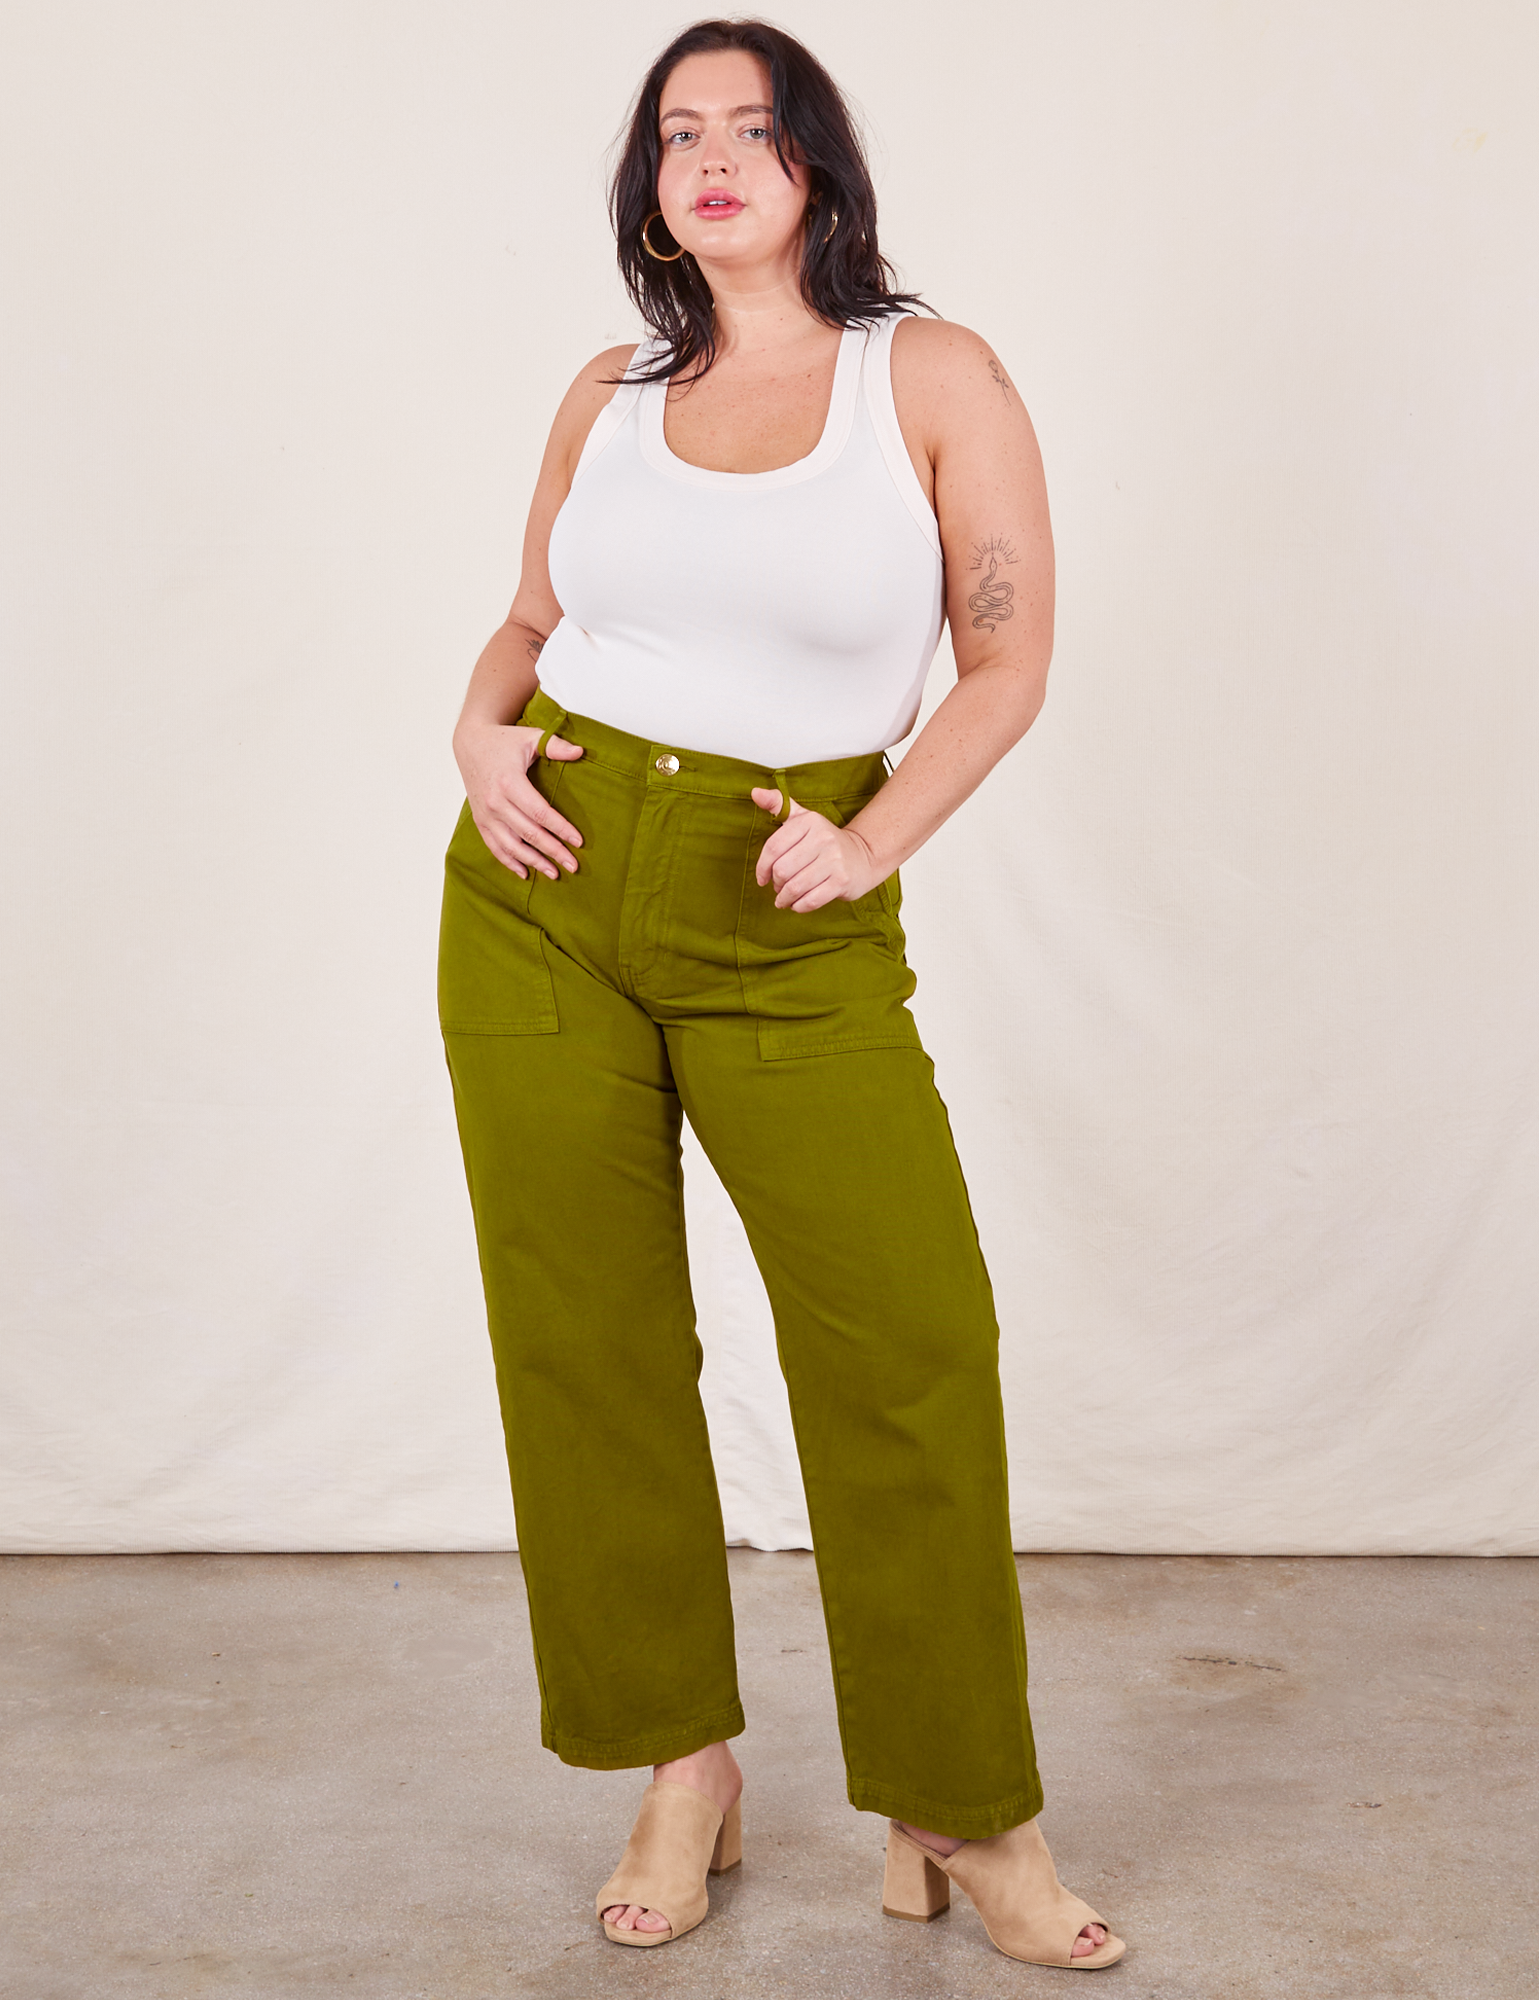 Faye is 5&#39;7&quot; and wearing L Work Pants in Olive Green paired with vintage off-white Tank Top